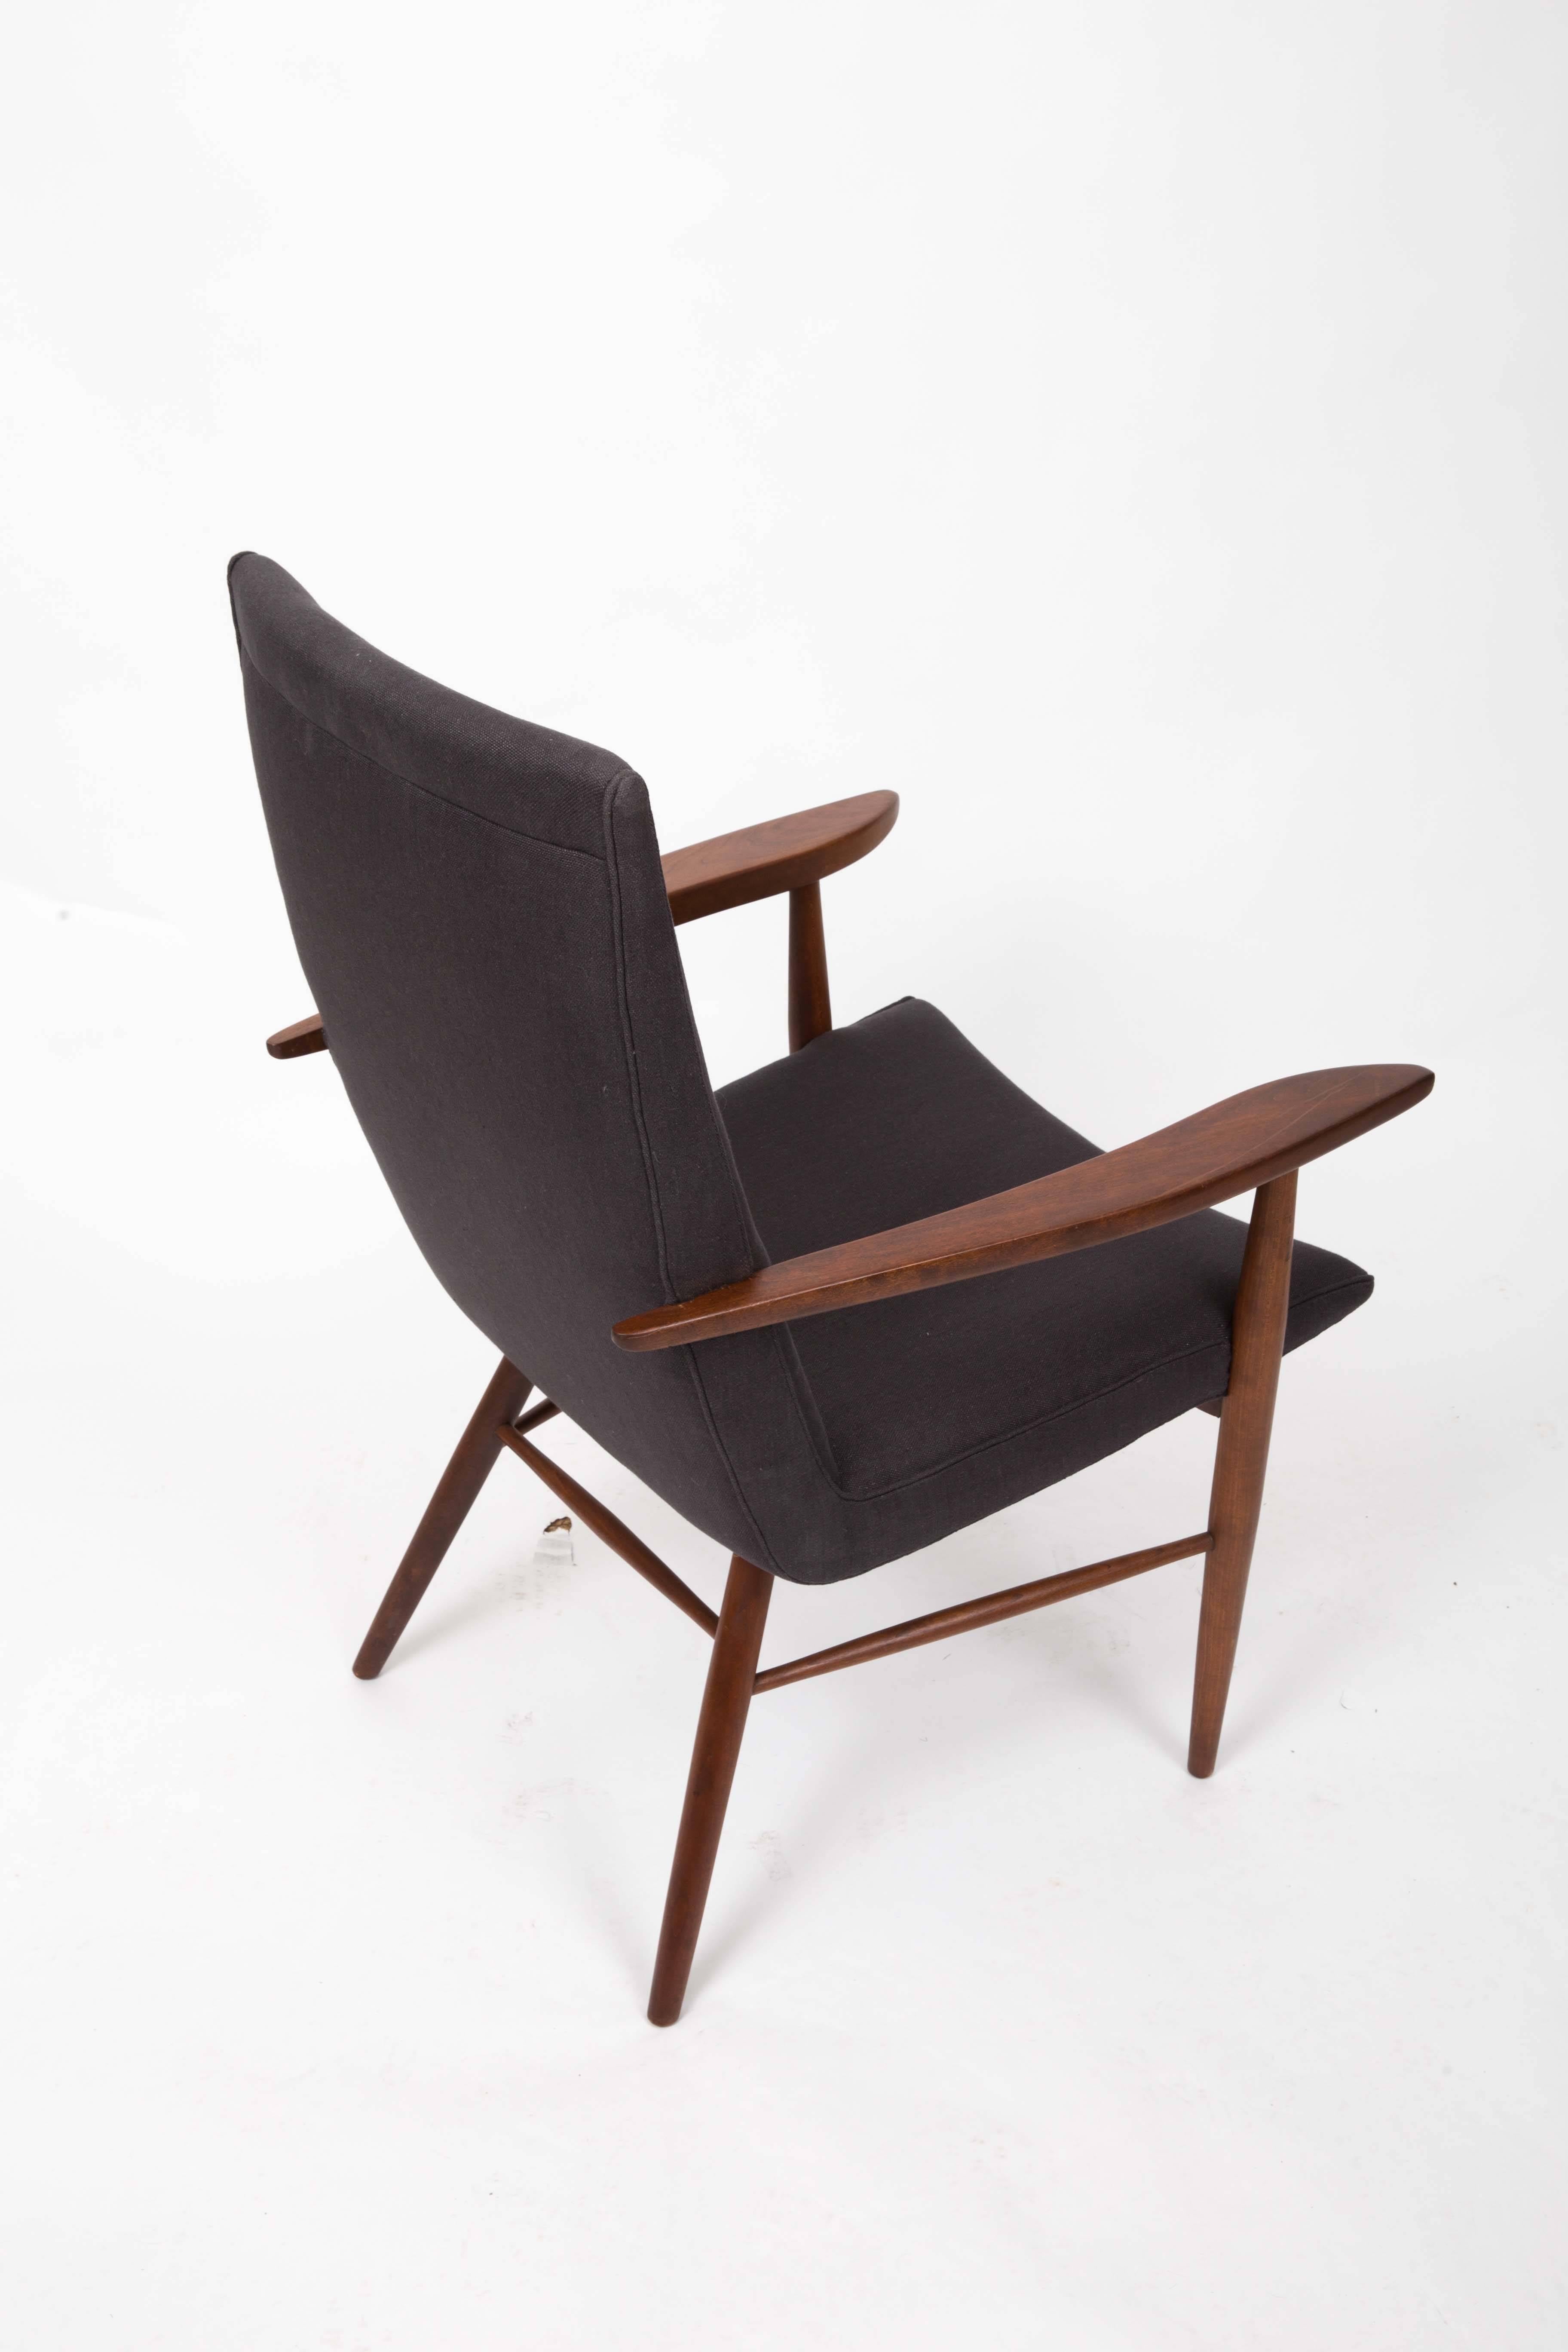 American Upholstered Dining Chair by George Nakashima for Widdicomb